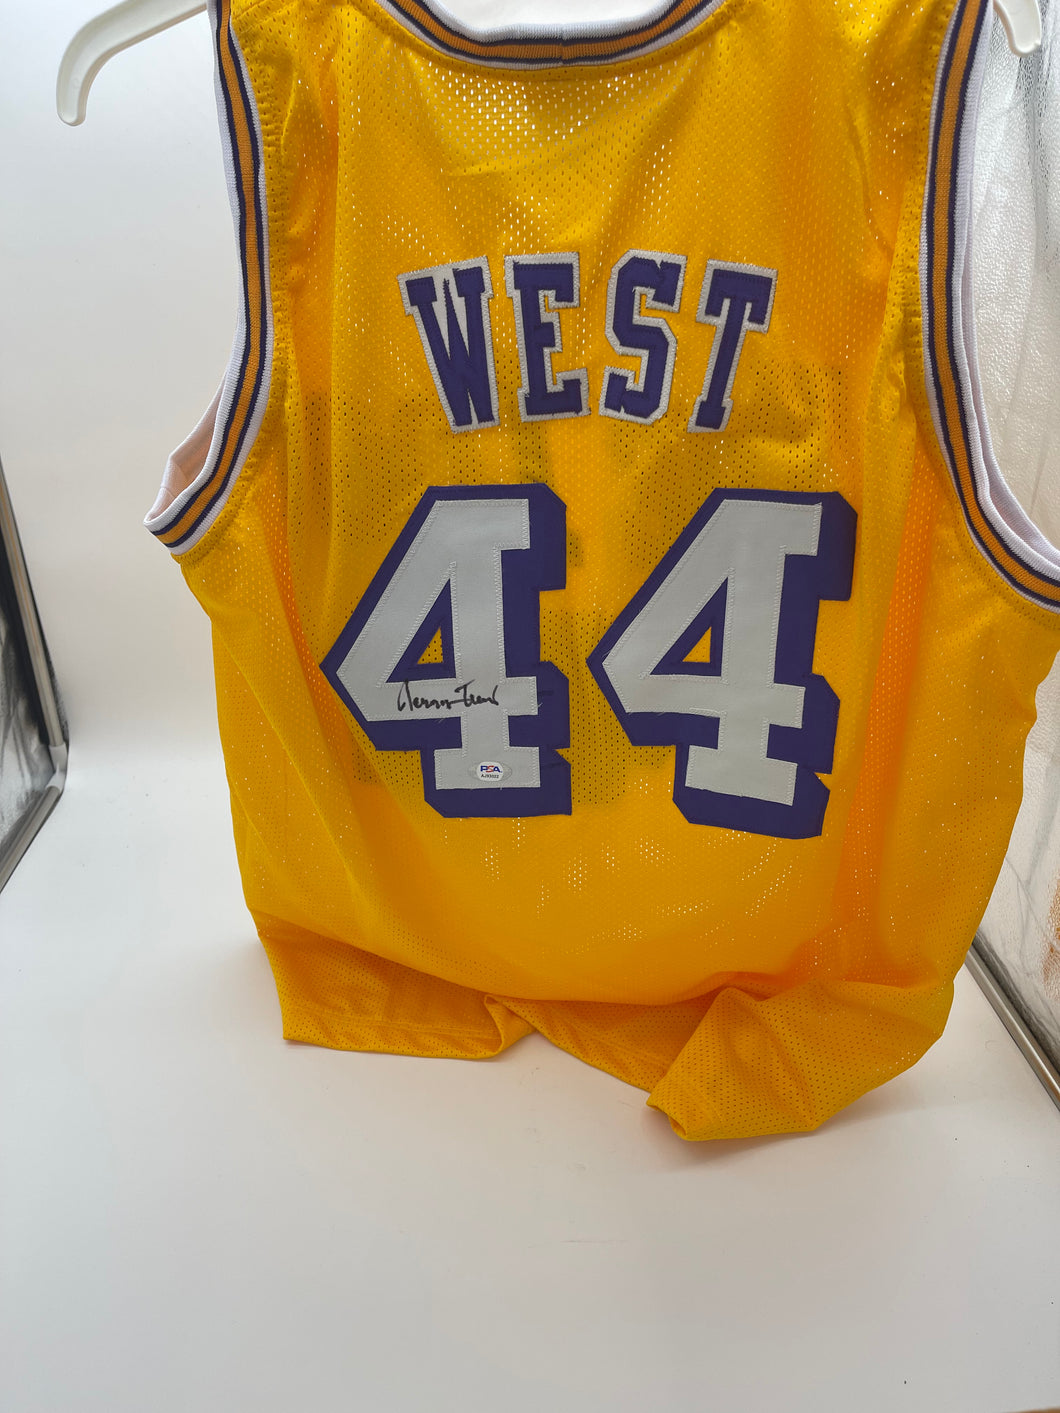 Jerry West signed jersey